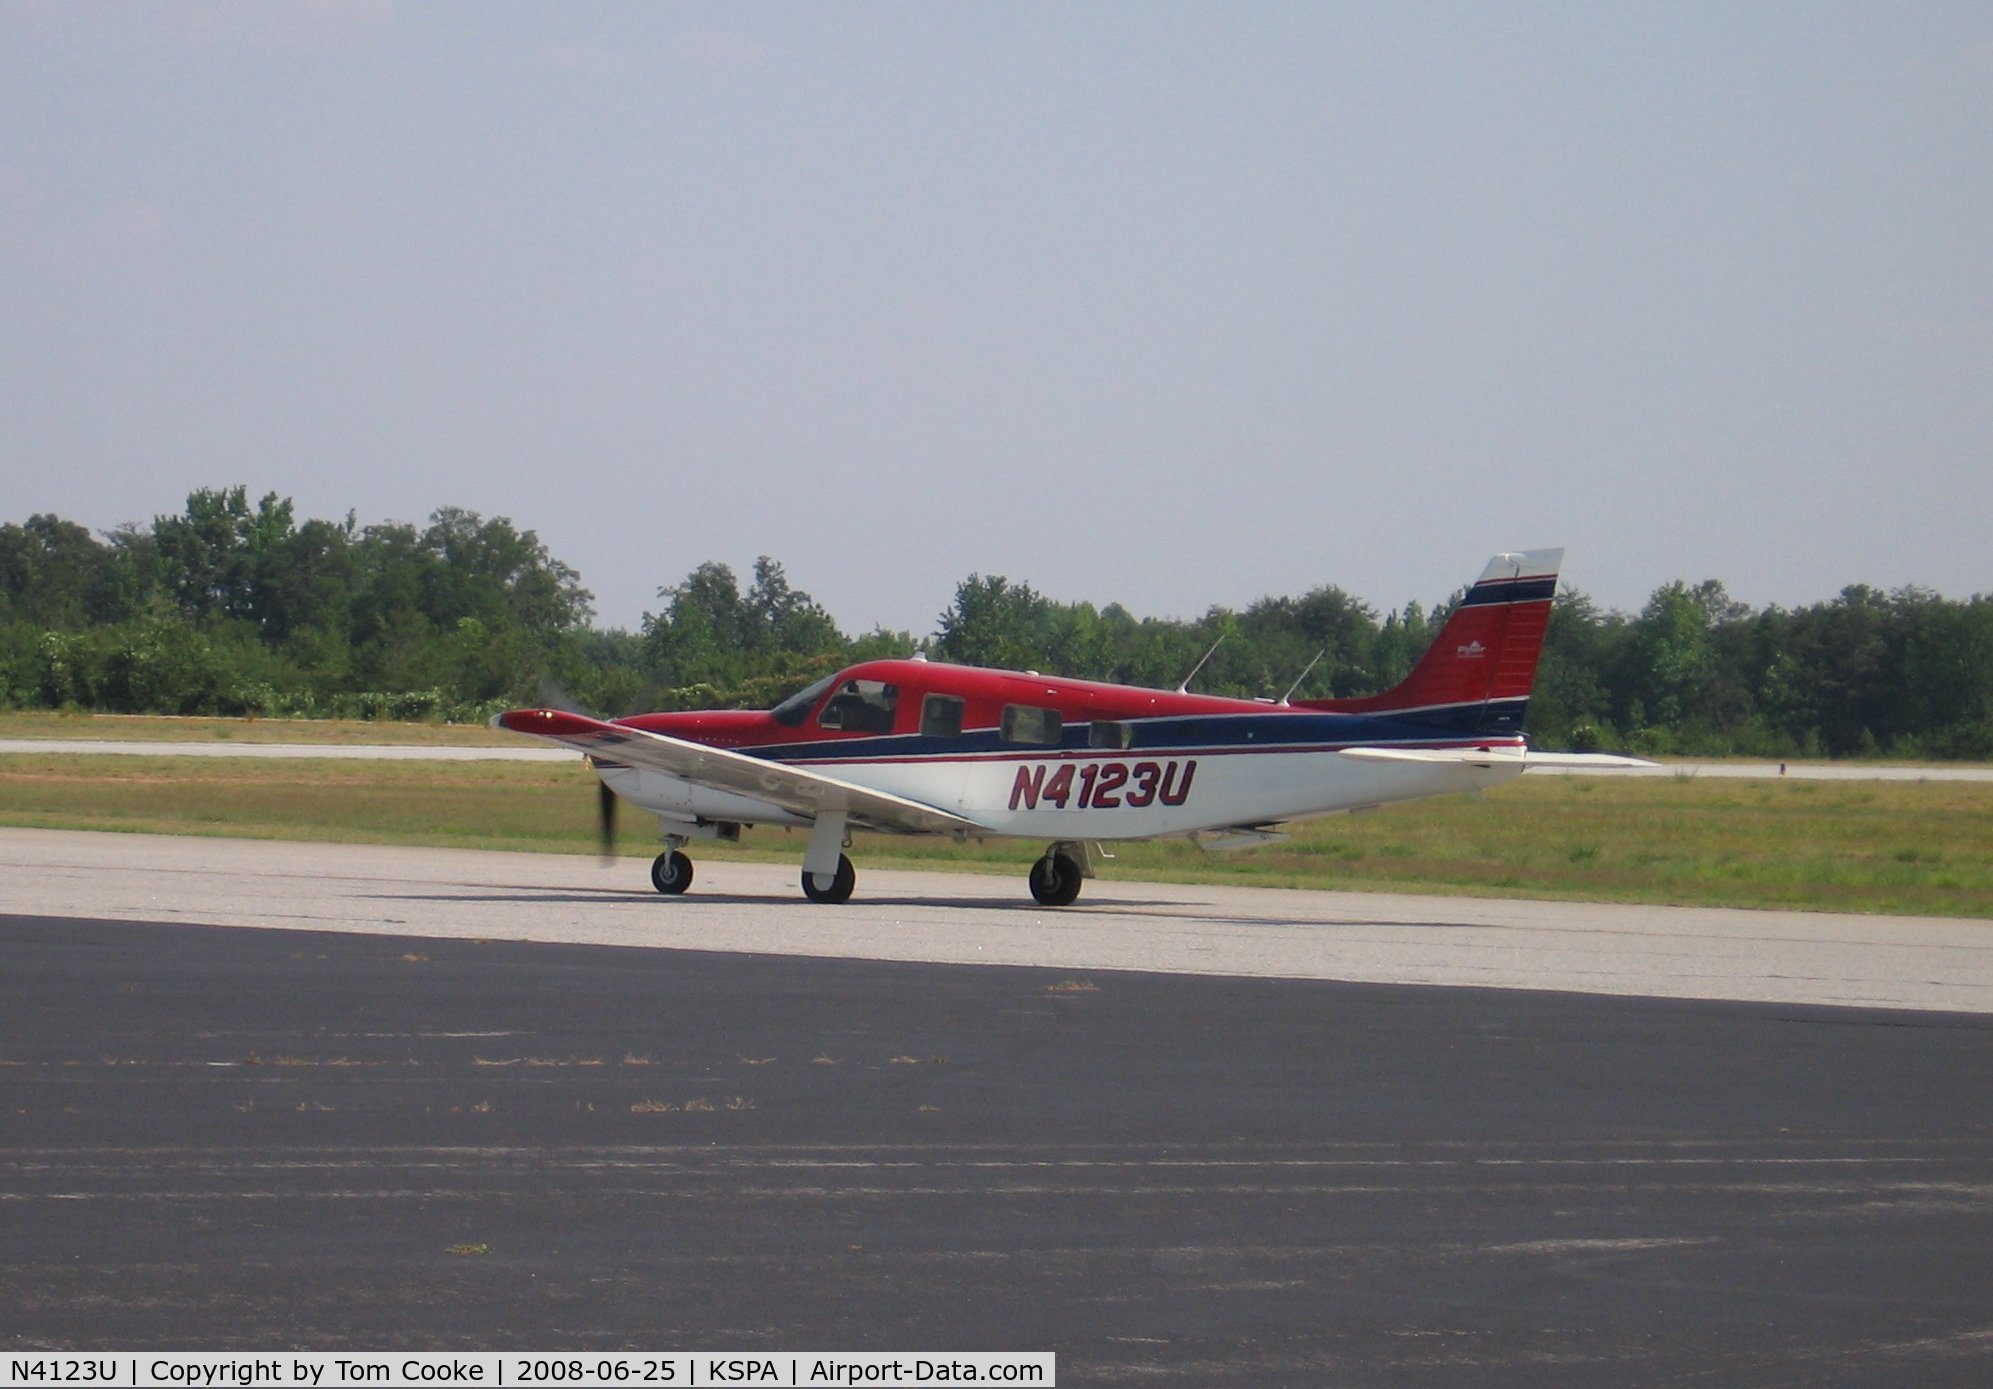 N4123U, 1998 Piper PA-32R-301 C/N 3246116, Saratoga taxiing out with the airconditioning on